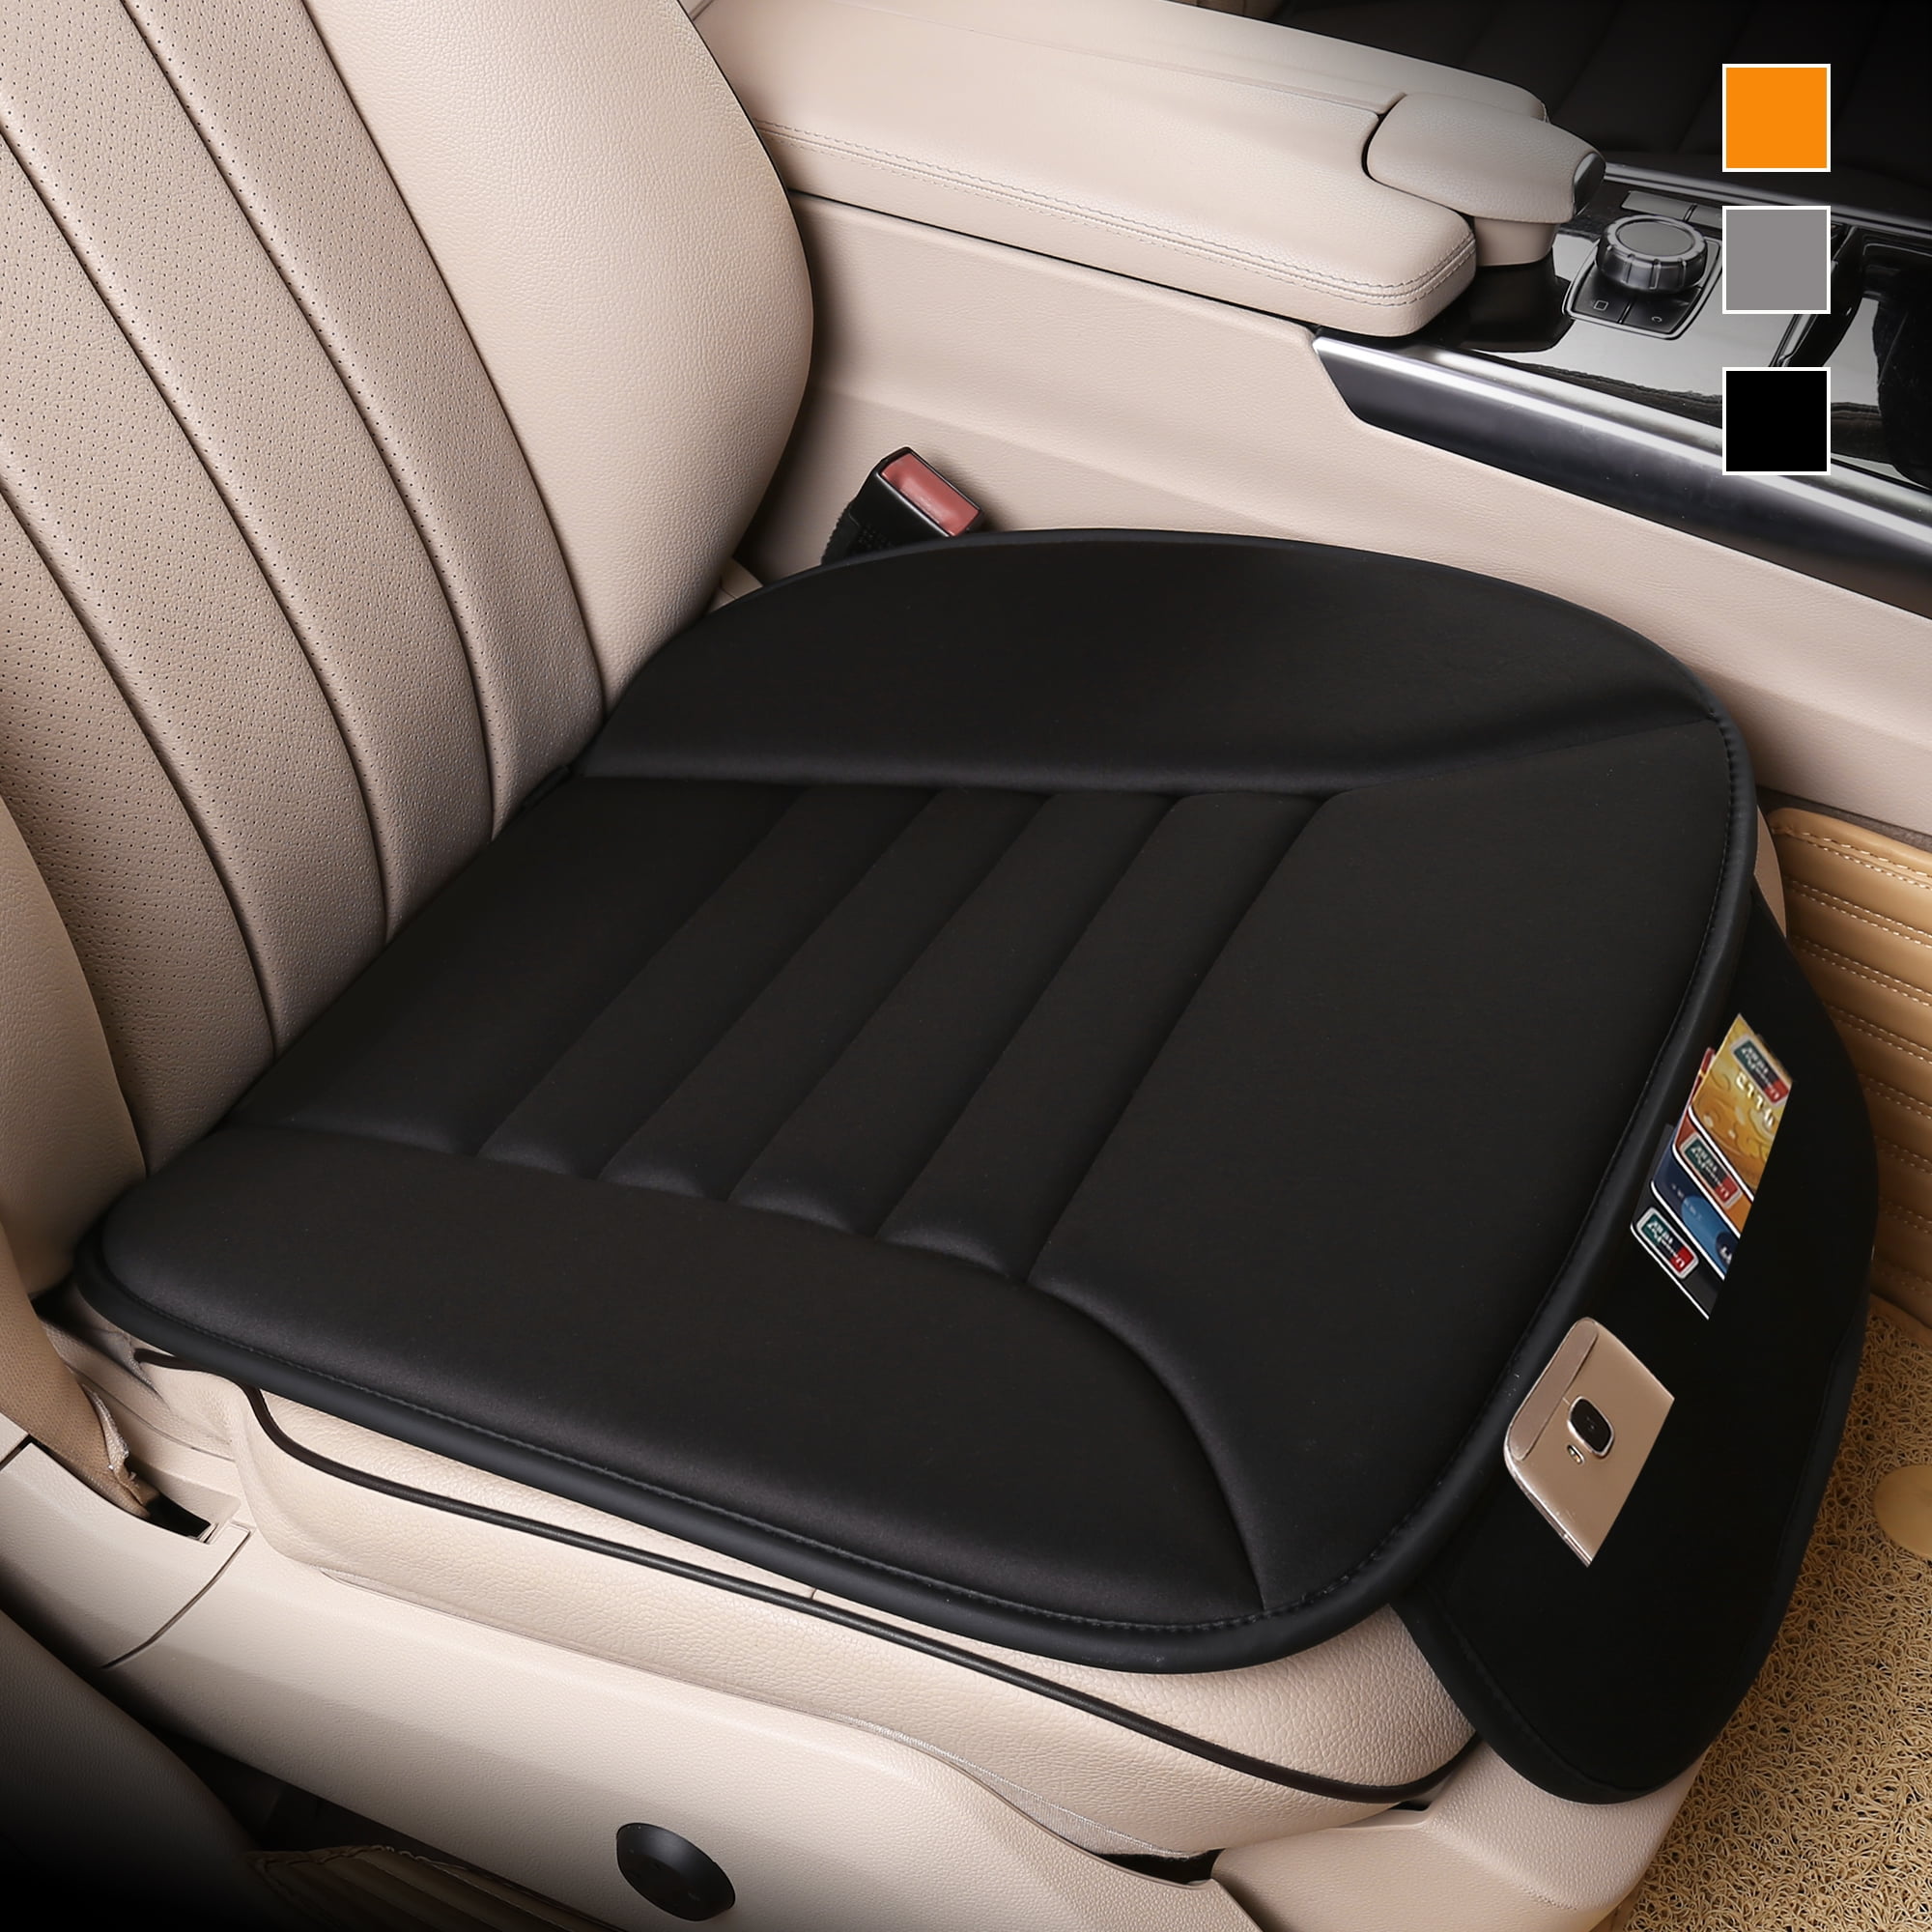 Adult Car Booster Seat Cushion Boost Mat Breathable Car Seat Pad for Car